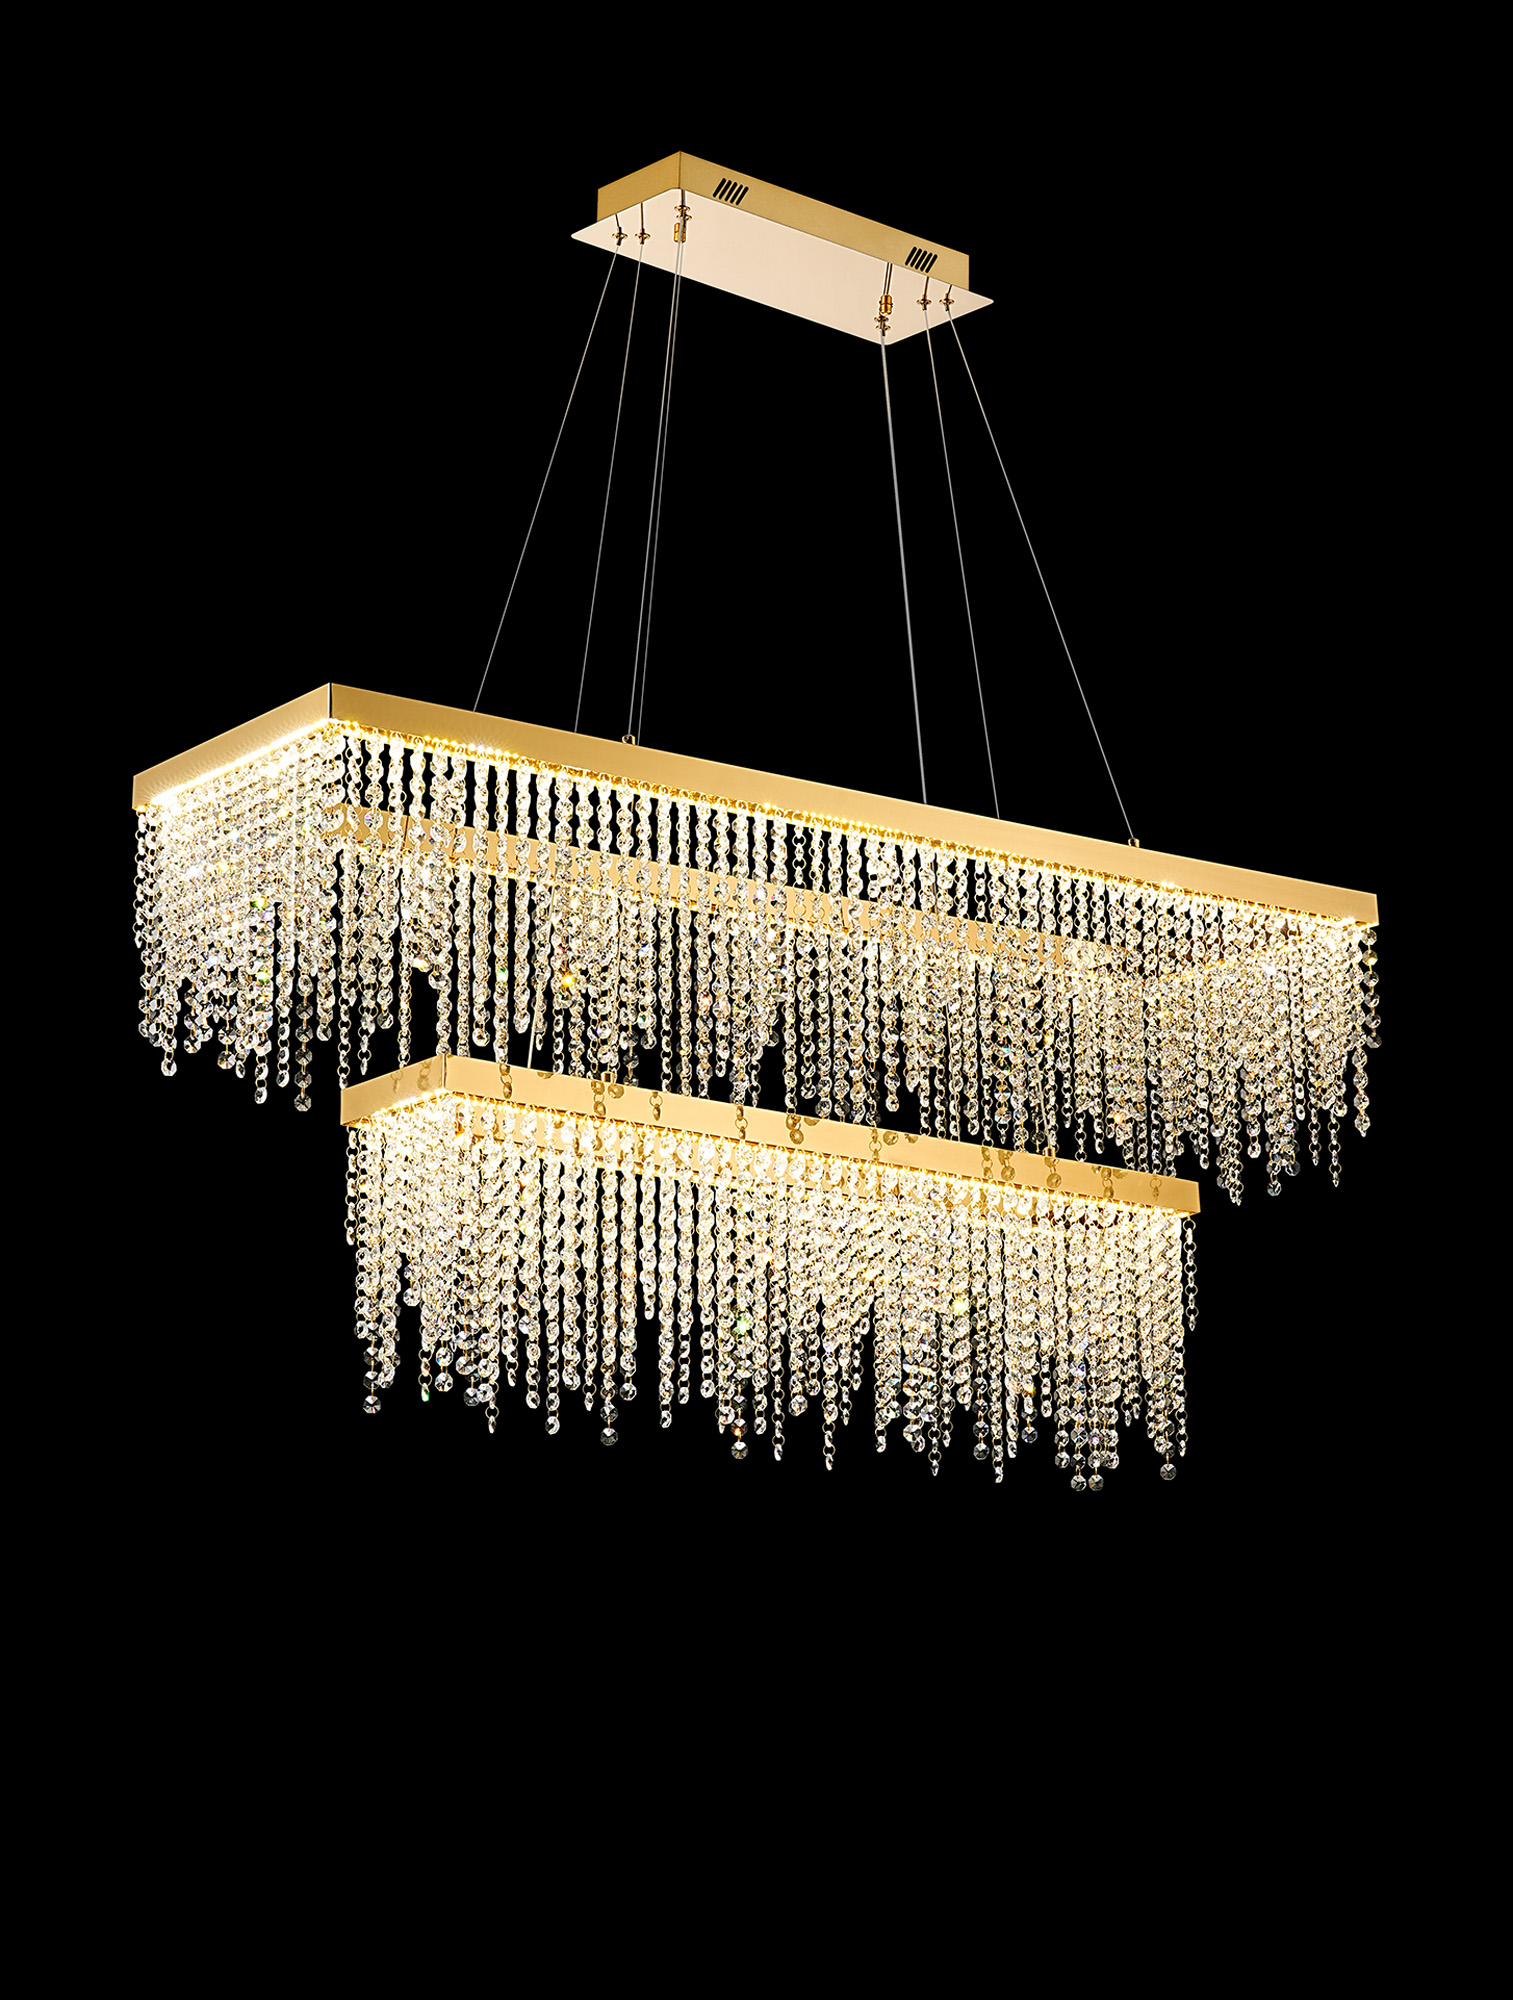 IL32876  Bano Rectangular Dimmable 2 Tier Pendant 65W LED French Gold